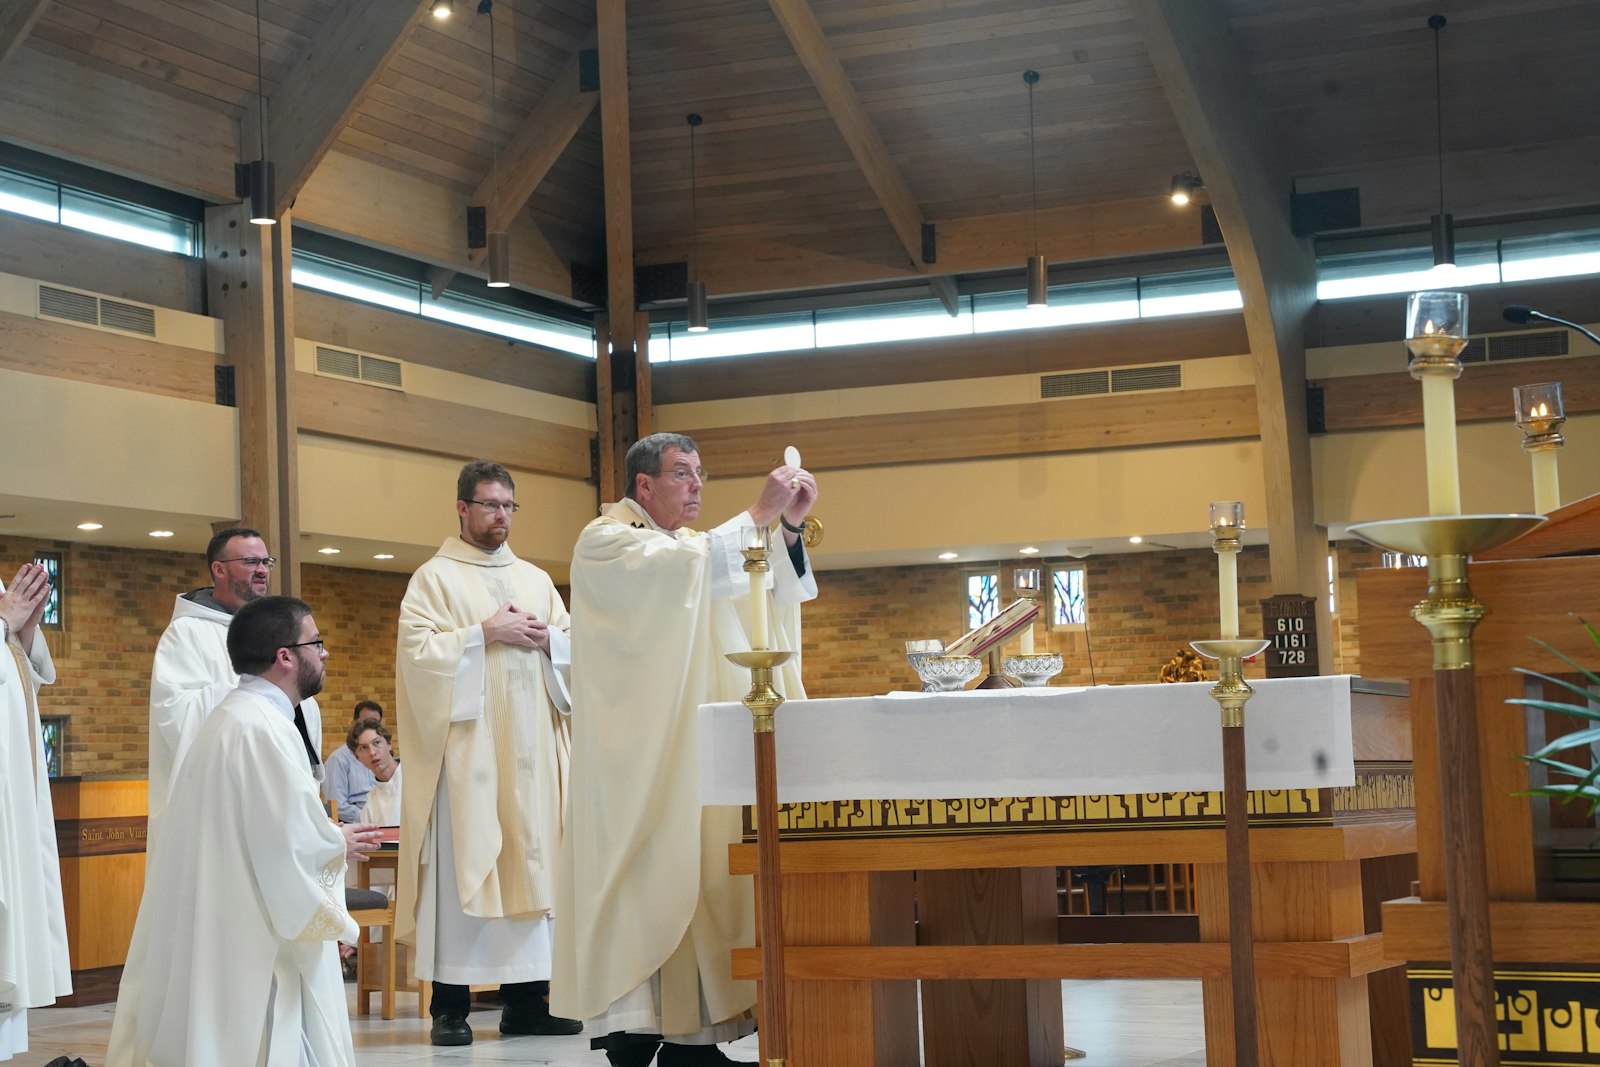 Detroit Archbishop Allen H. Vigneron celebrates Mass during the Detroit Catholic Men's Conference at St. John Vianney Parish in Shelby Township. Archbishop Vigneron thanked the men for their attendance, reminding them that Jesus sees and appreciates the sacrifices they make to be holy, faith-filled men of God.